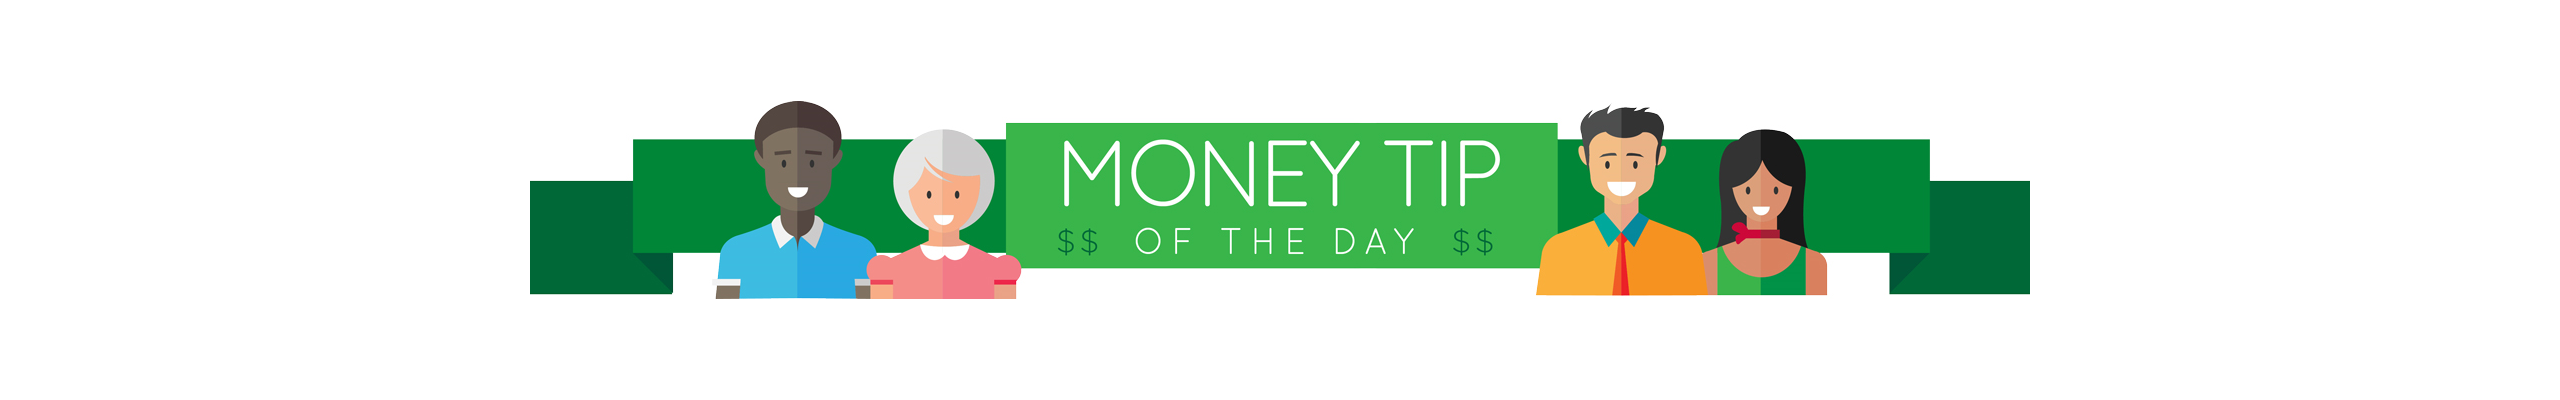 Money Tip of the Day